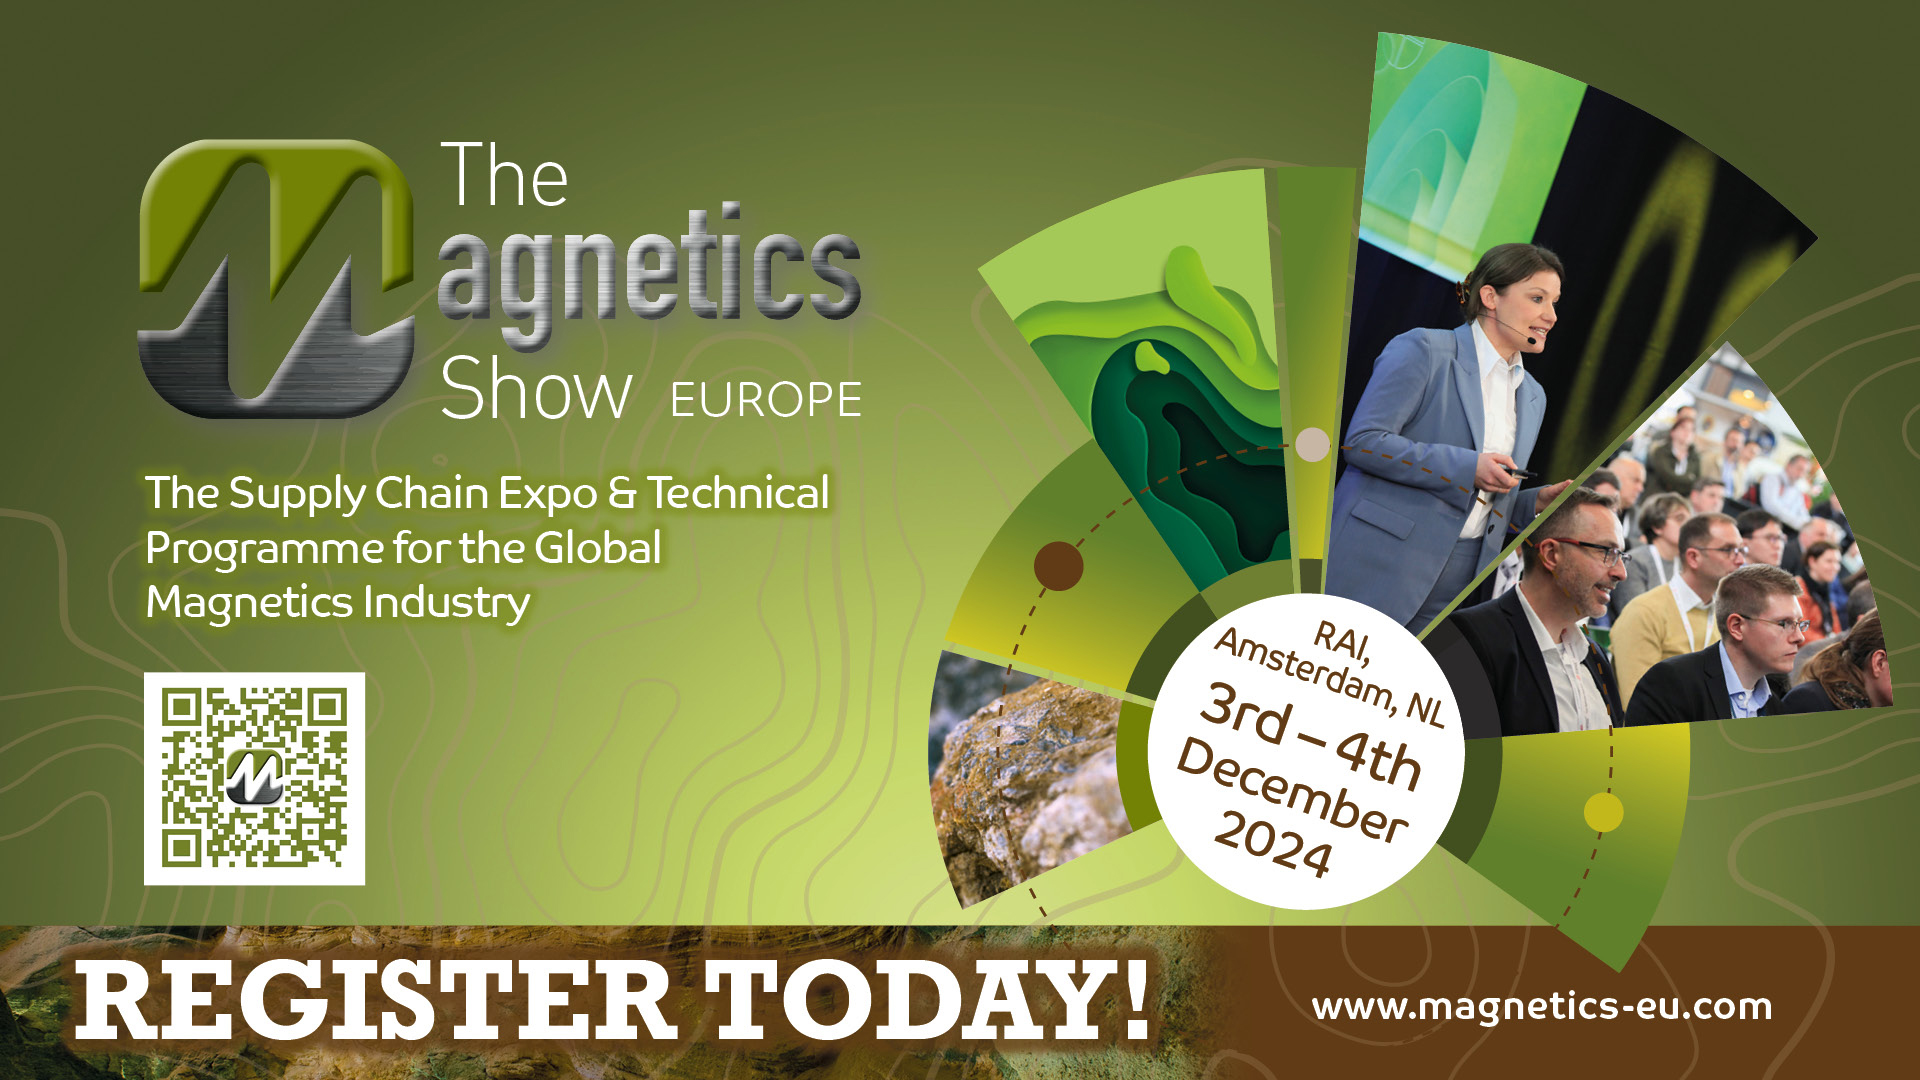 Supply Chain Expo & Technical Programme for the Global Magnetics Industry